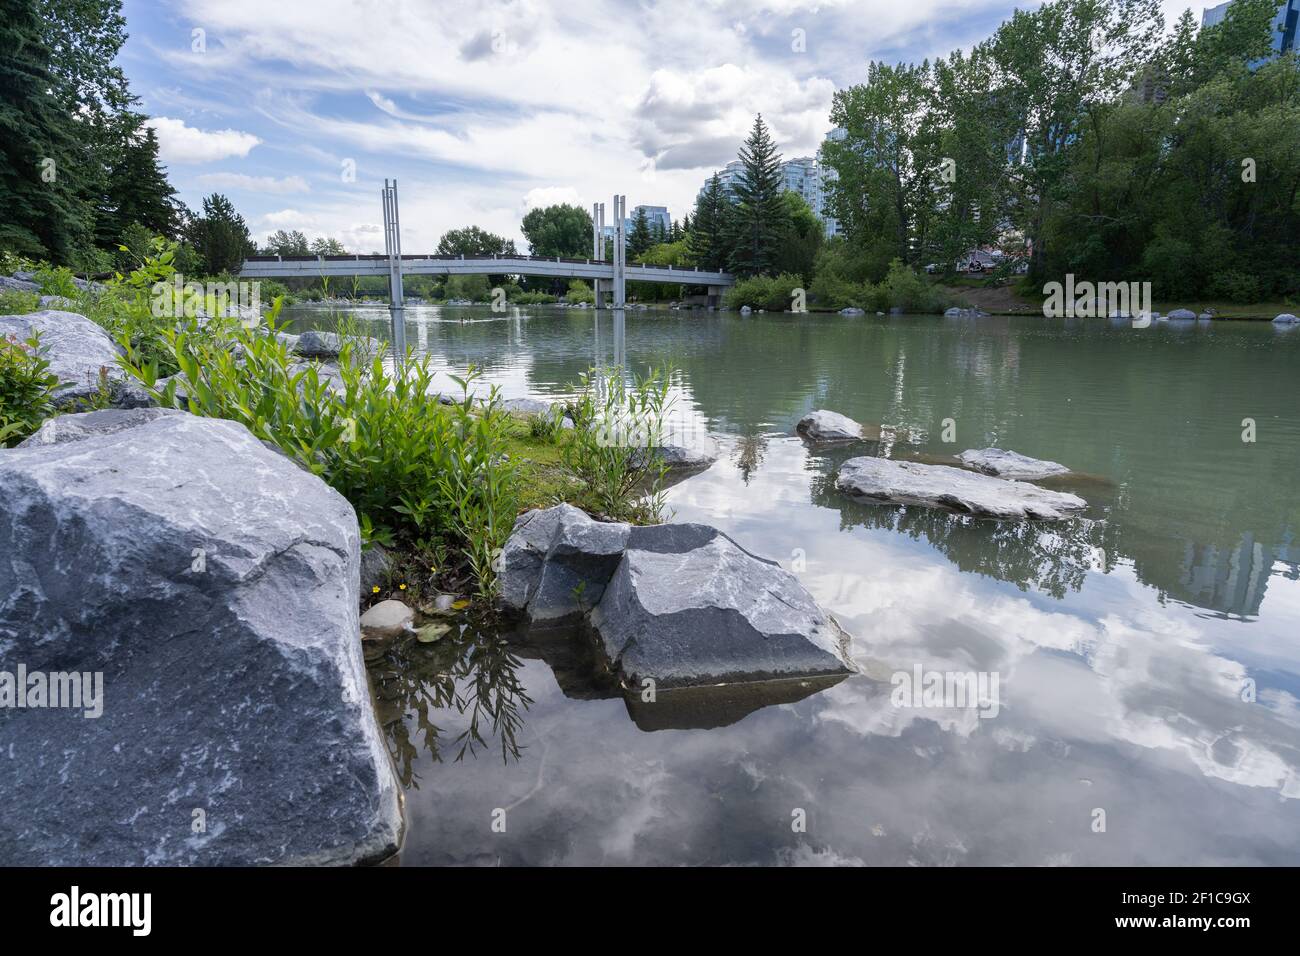 Calgary Park High Resolution Stock Photography and Images Alamy